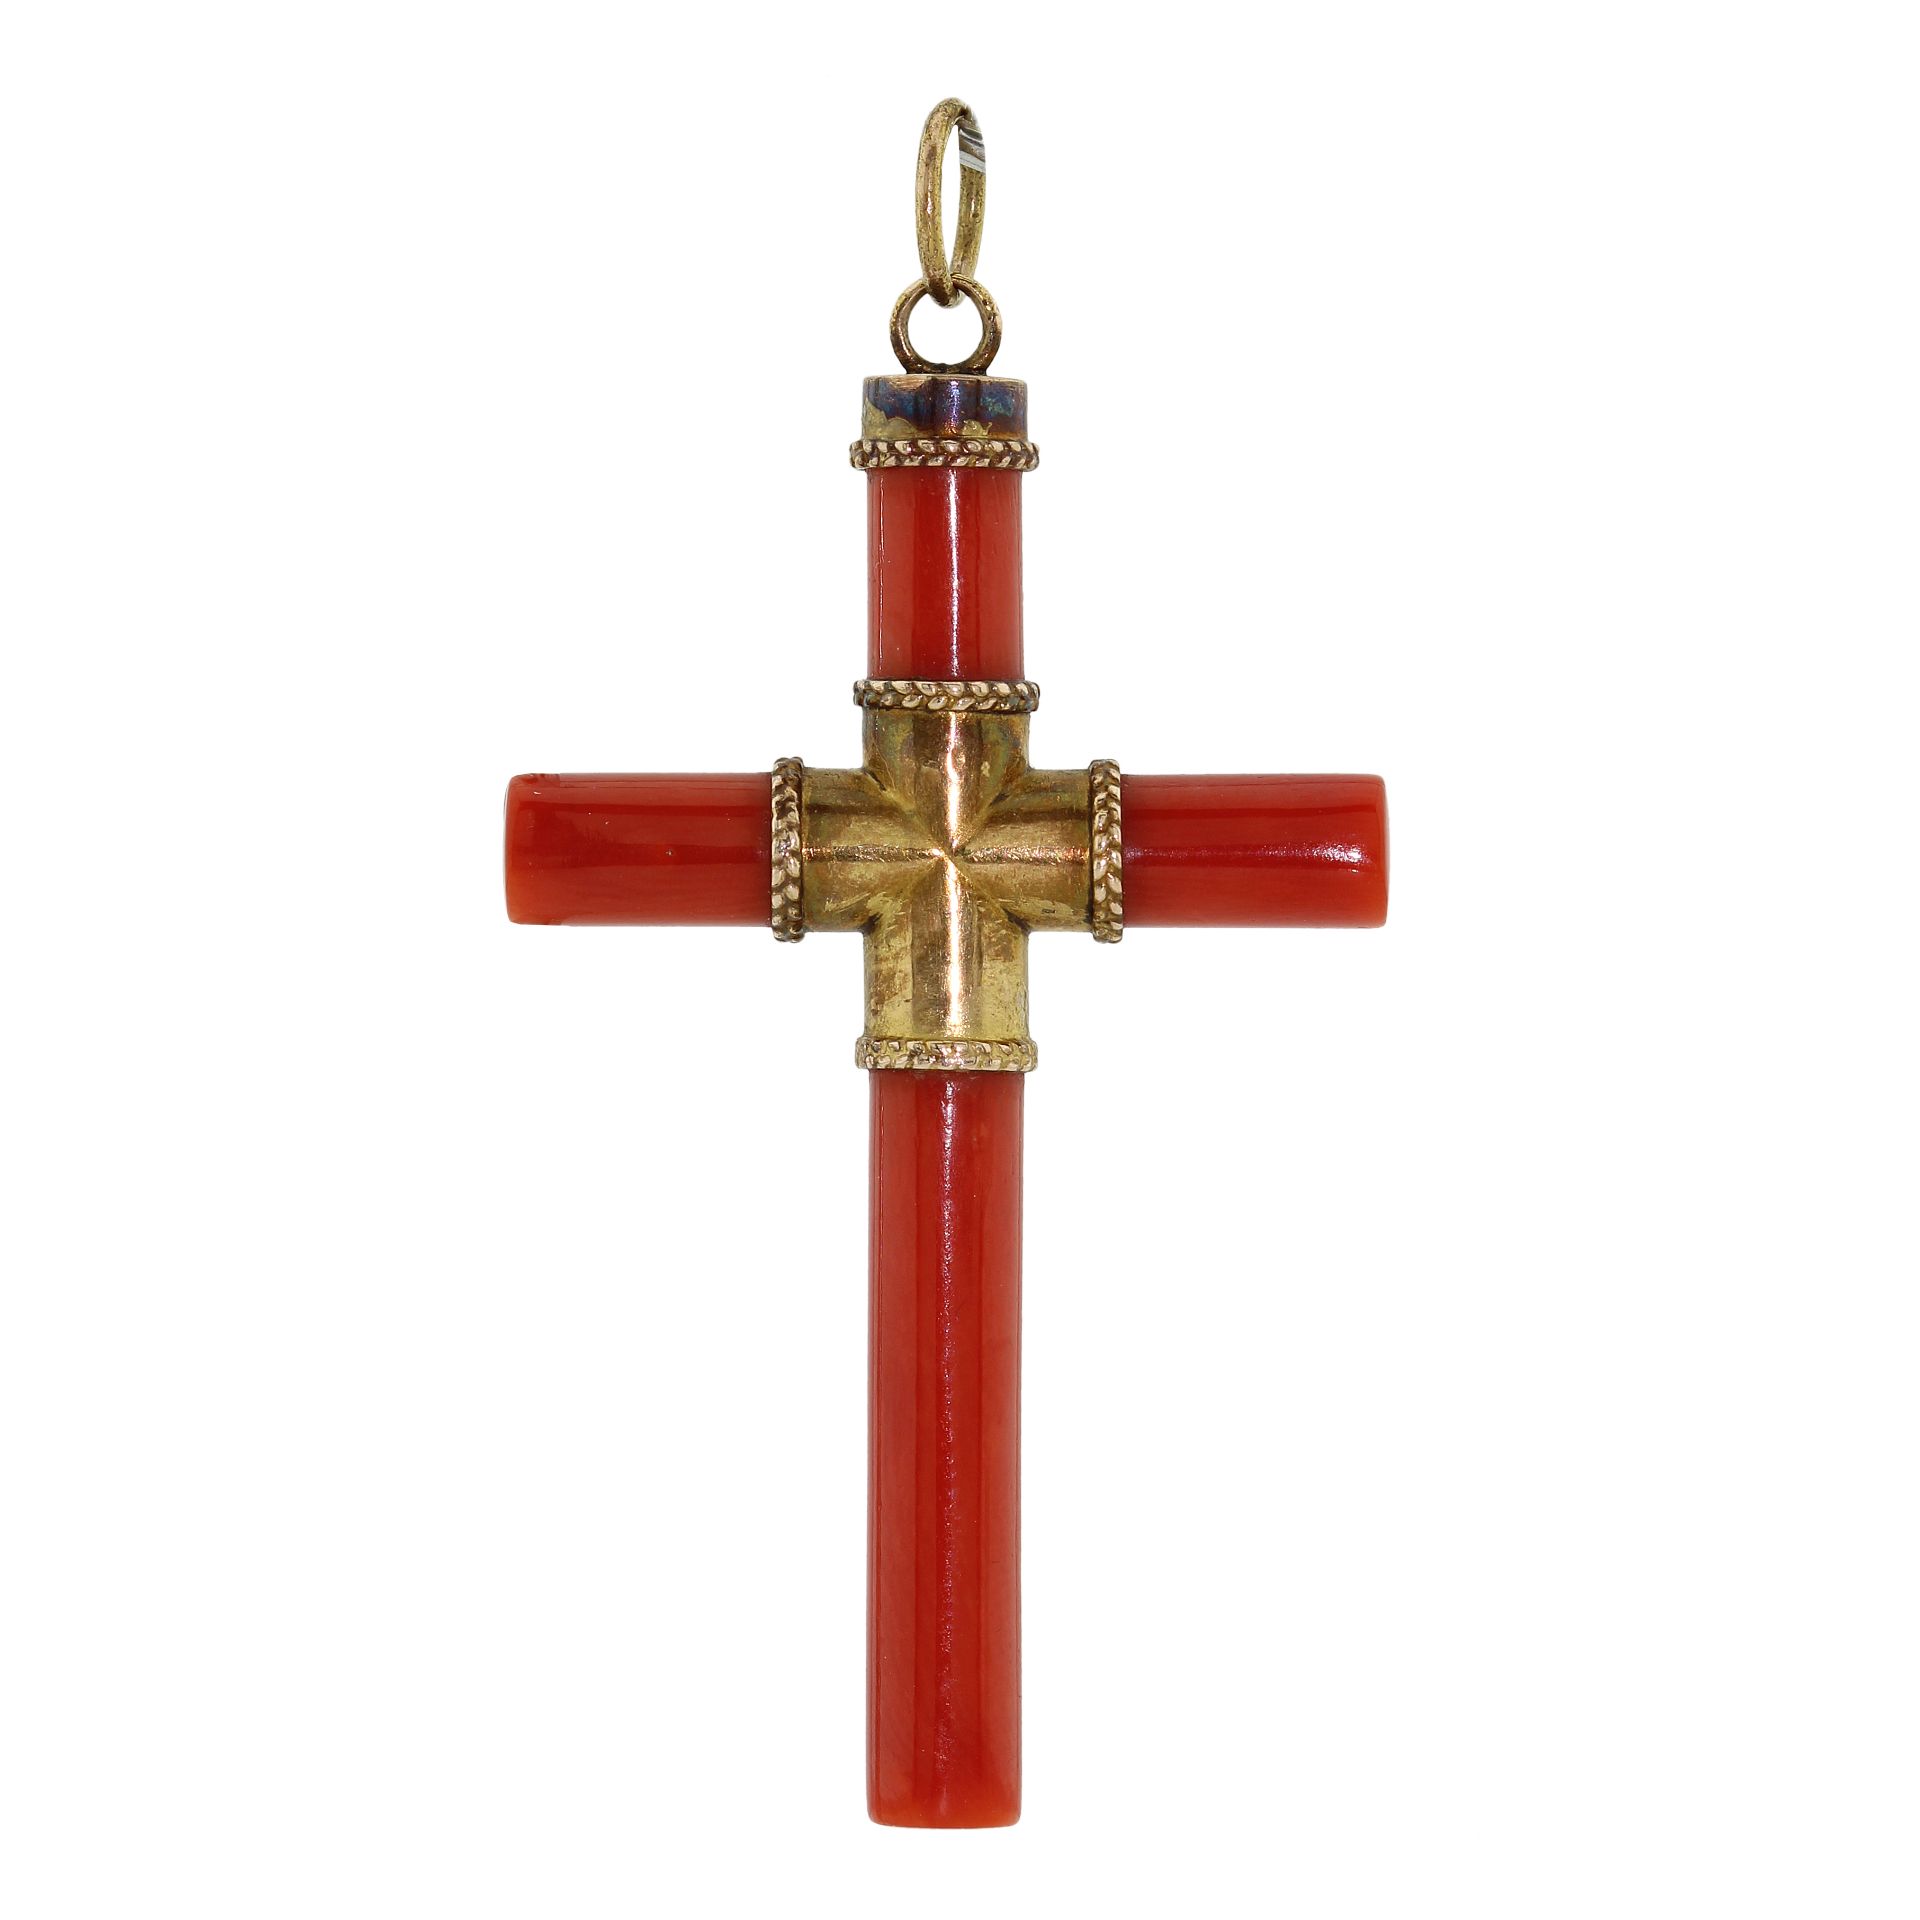 A CORAL CRUCIFIX / CROSS PENDANT in yellow gold, in the form of a cross, the gold centre holding